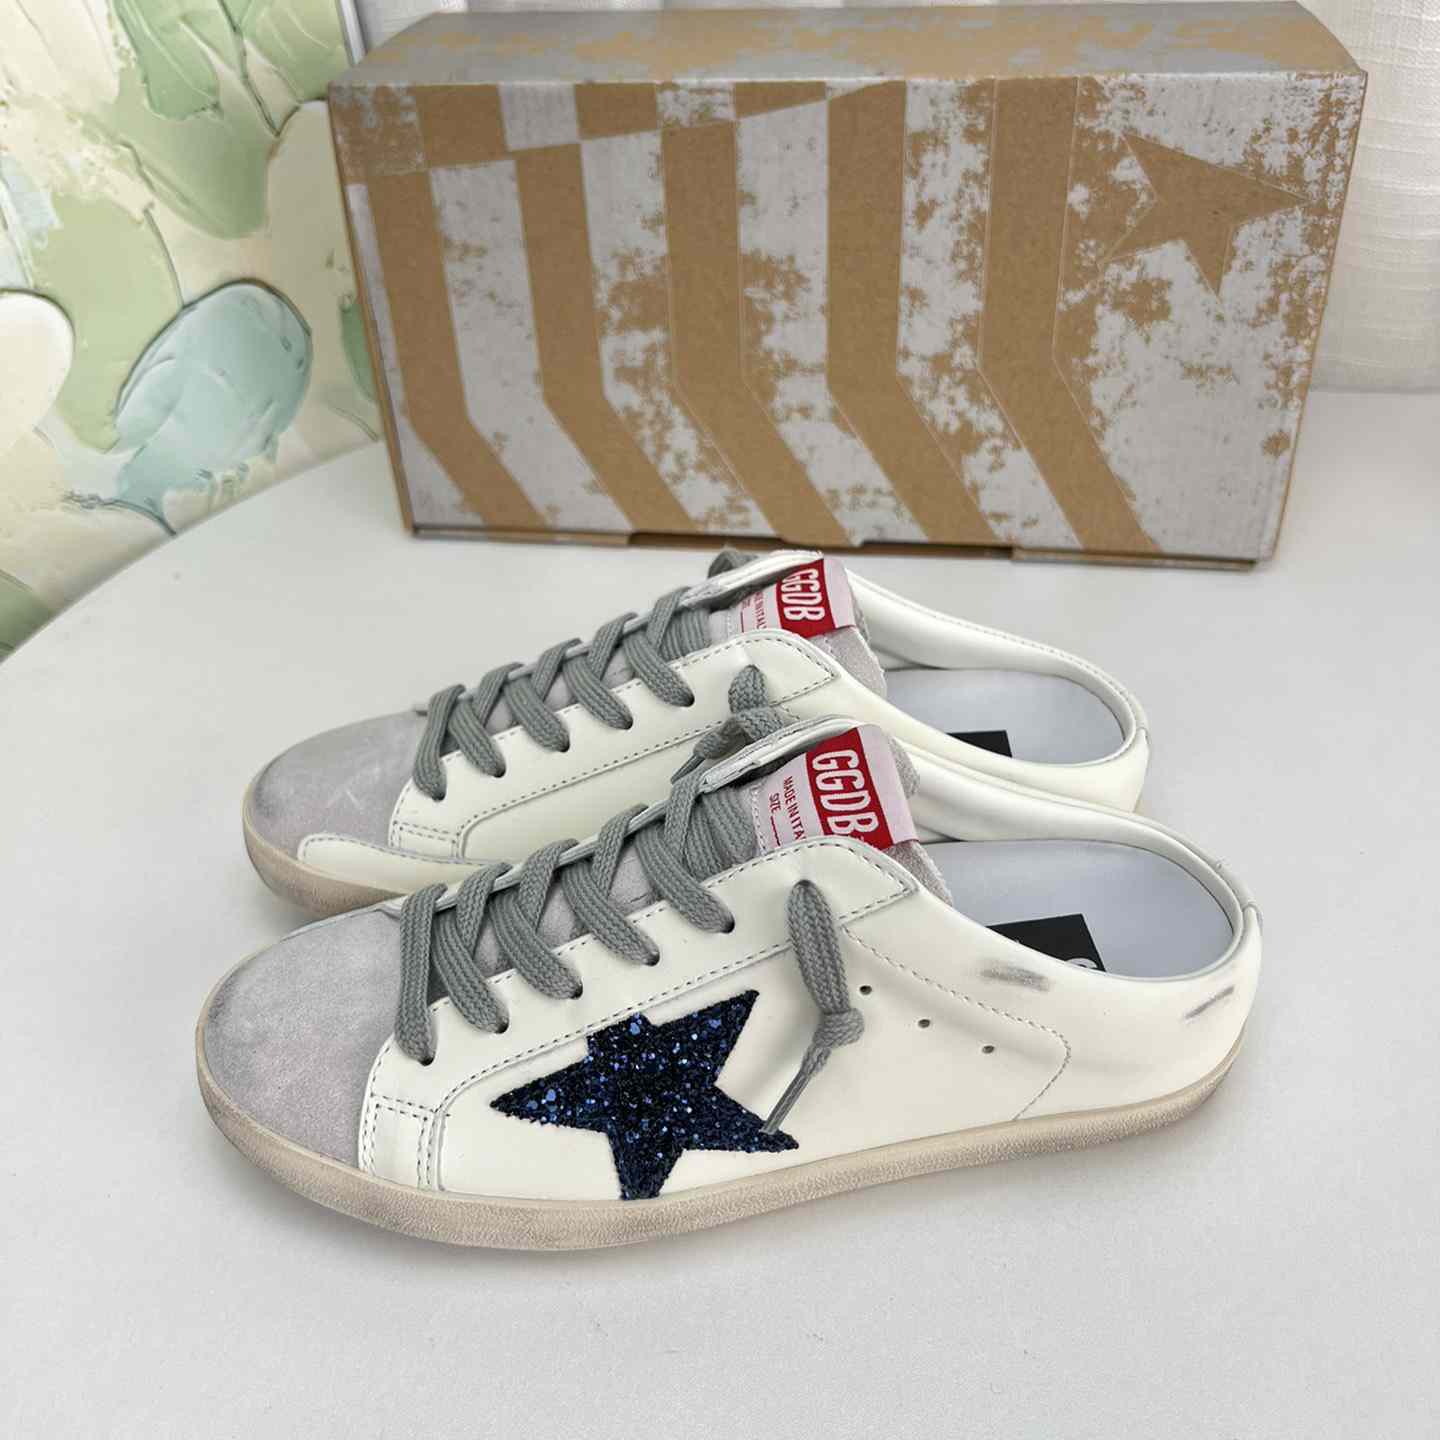 Golden Goose Super-Star Sabots In White Leather With Blue Glitter Star And Dove-Gray Suede Tongue - everydesigner